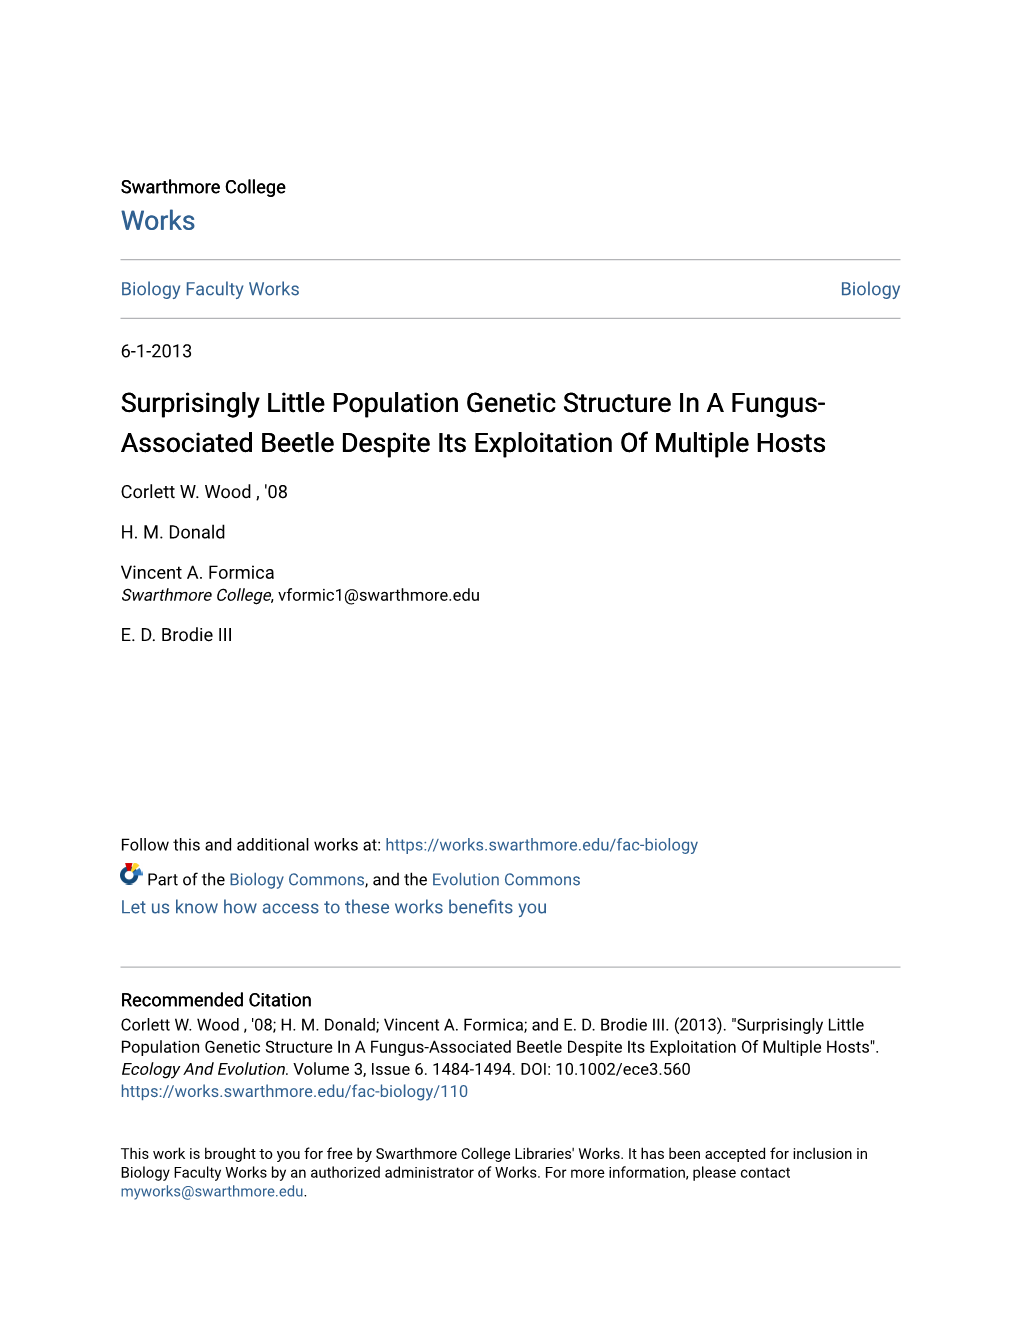 Surprisingly Little Population Genetic Structure in a Fungus-Associated Beetle Despite Its Exploitation of Multiple Hosts"